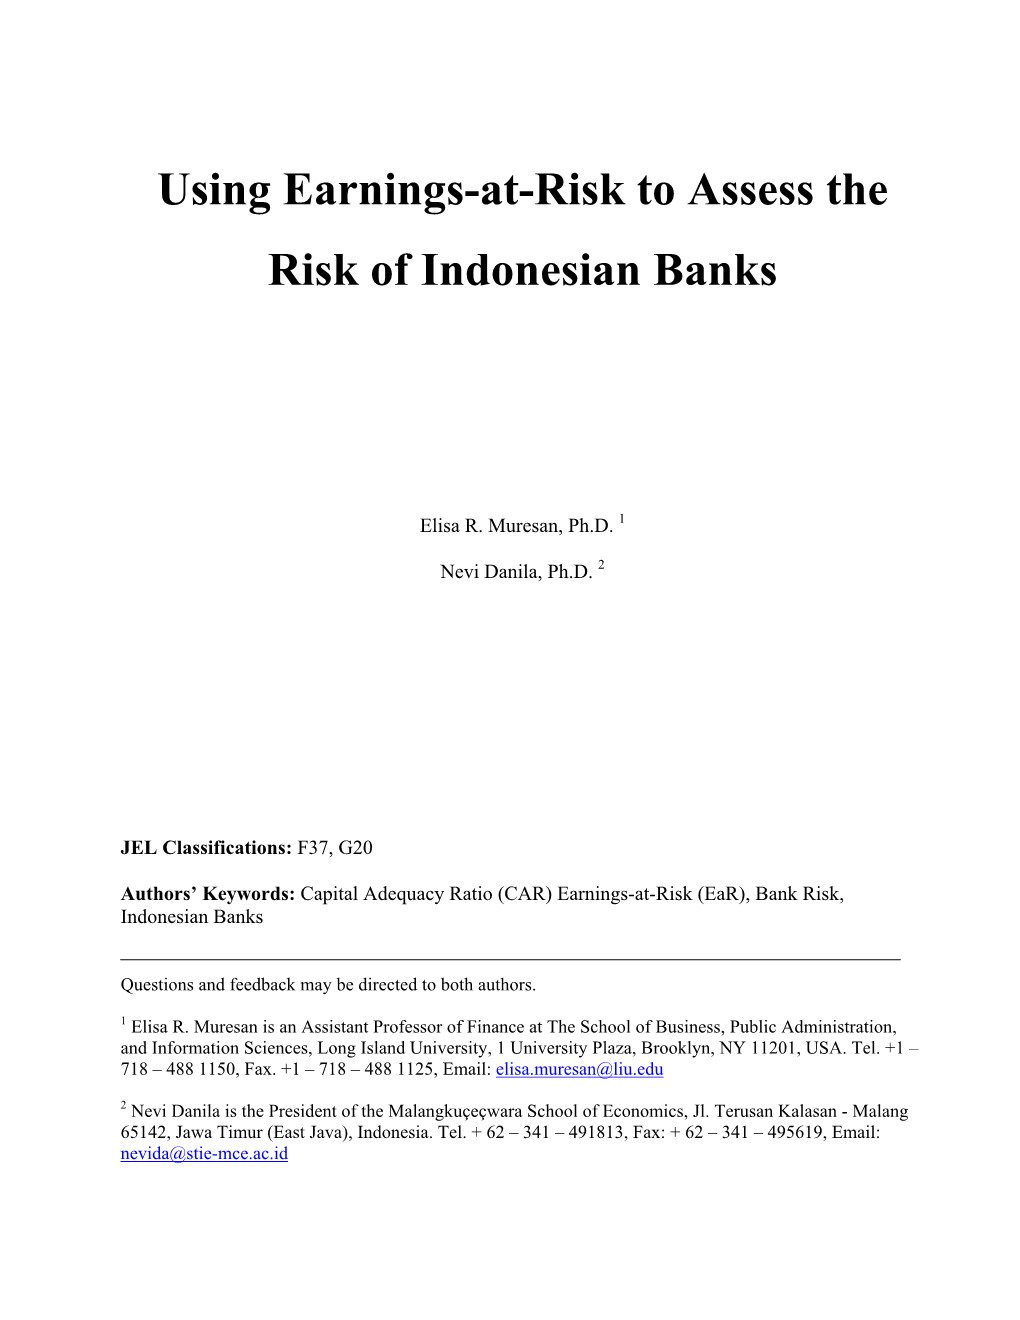 Using Earnings-At-Risk to Assess the Risk of Indonesian Banks